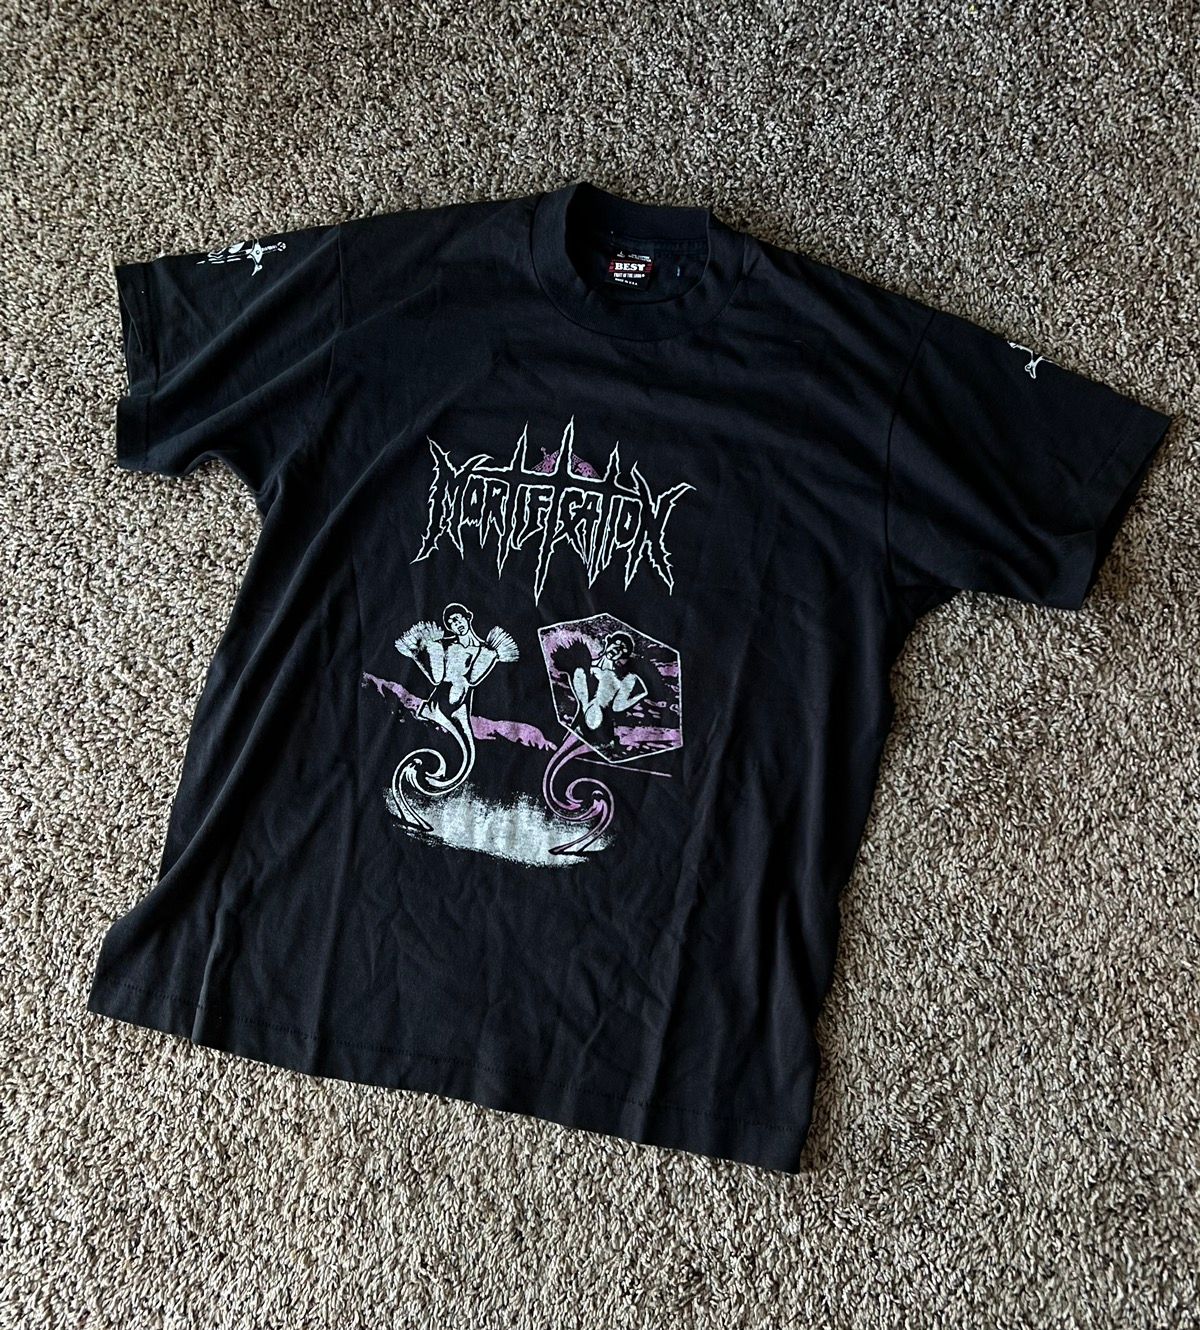 Pre-owned Band Tees X Rock T Shirt Vintage Mortification Band T-shirt Live Planetarium Metal In Black